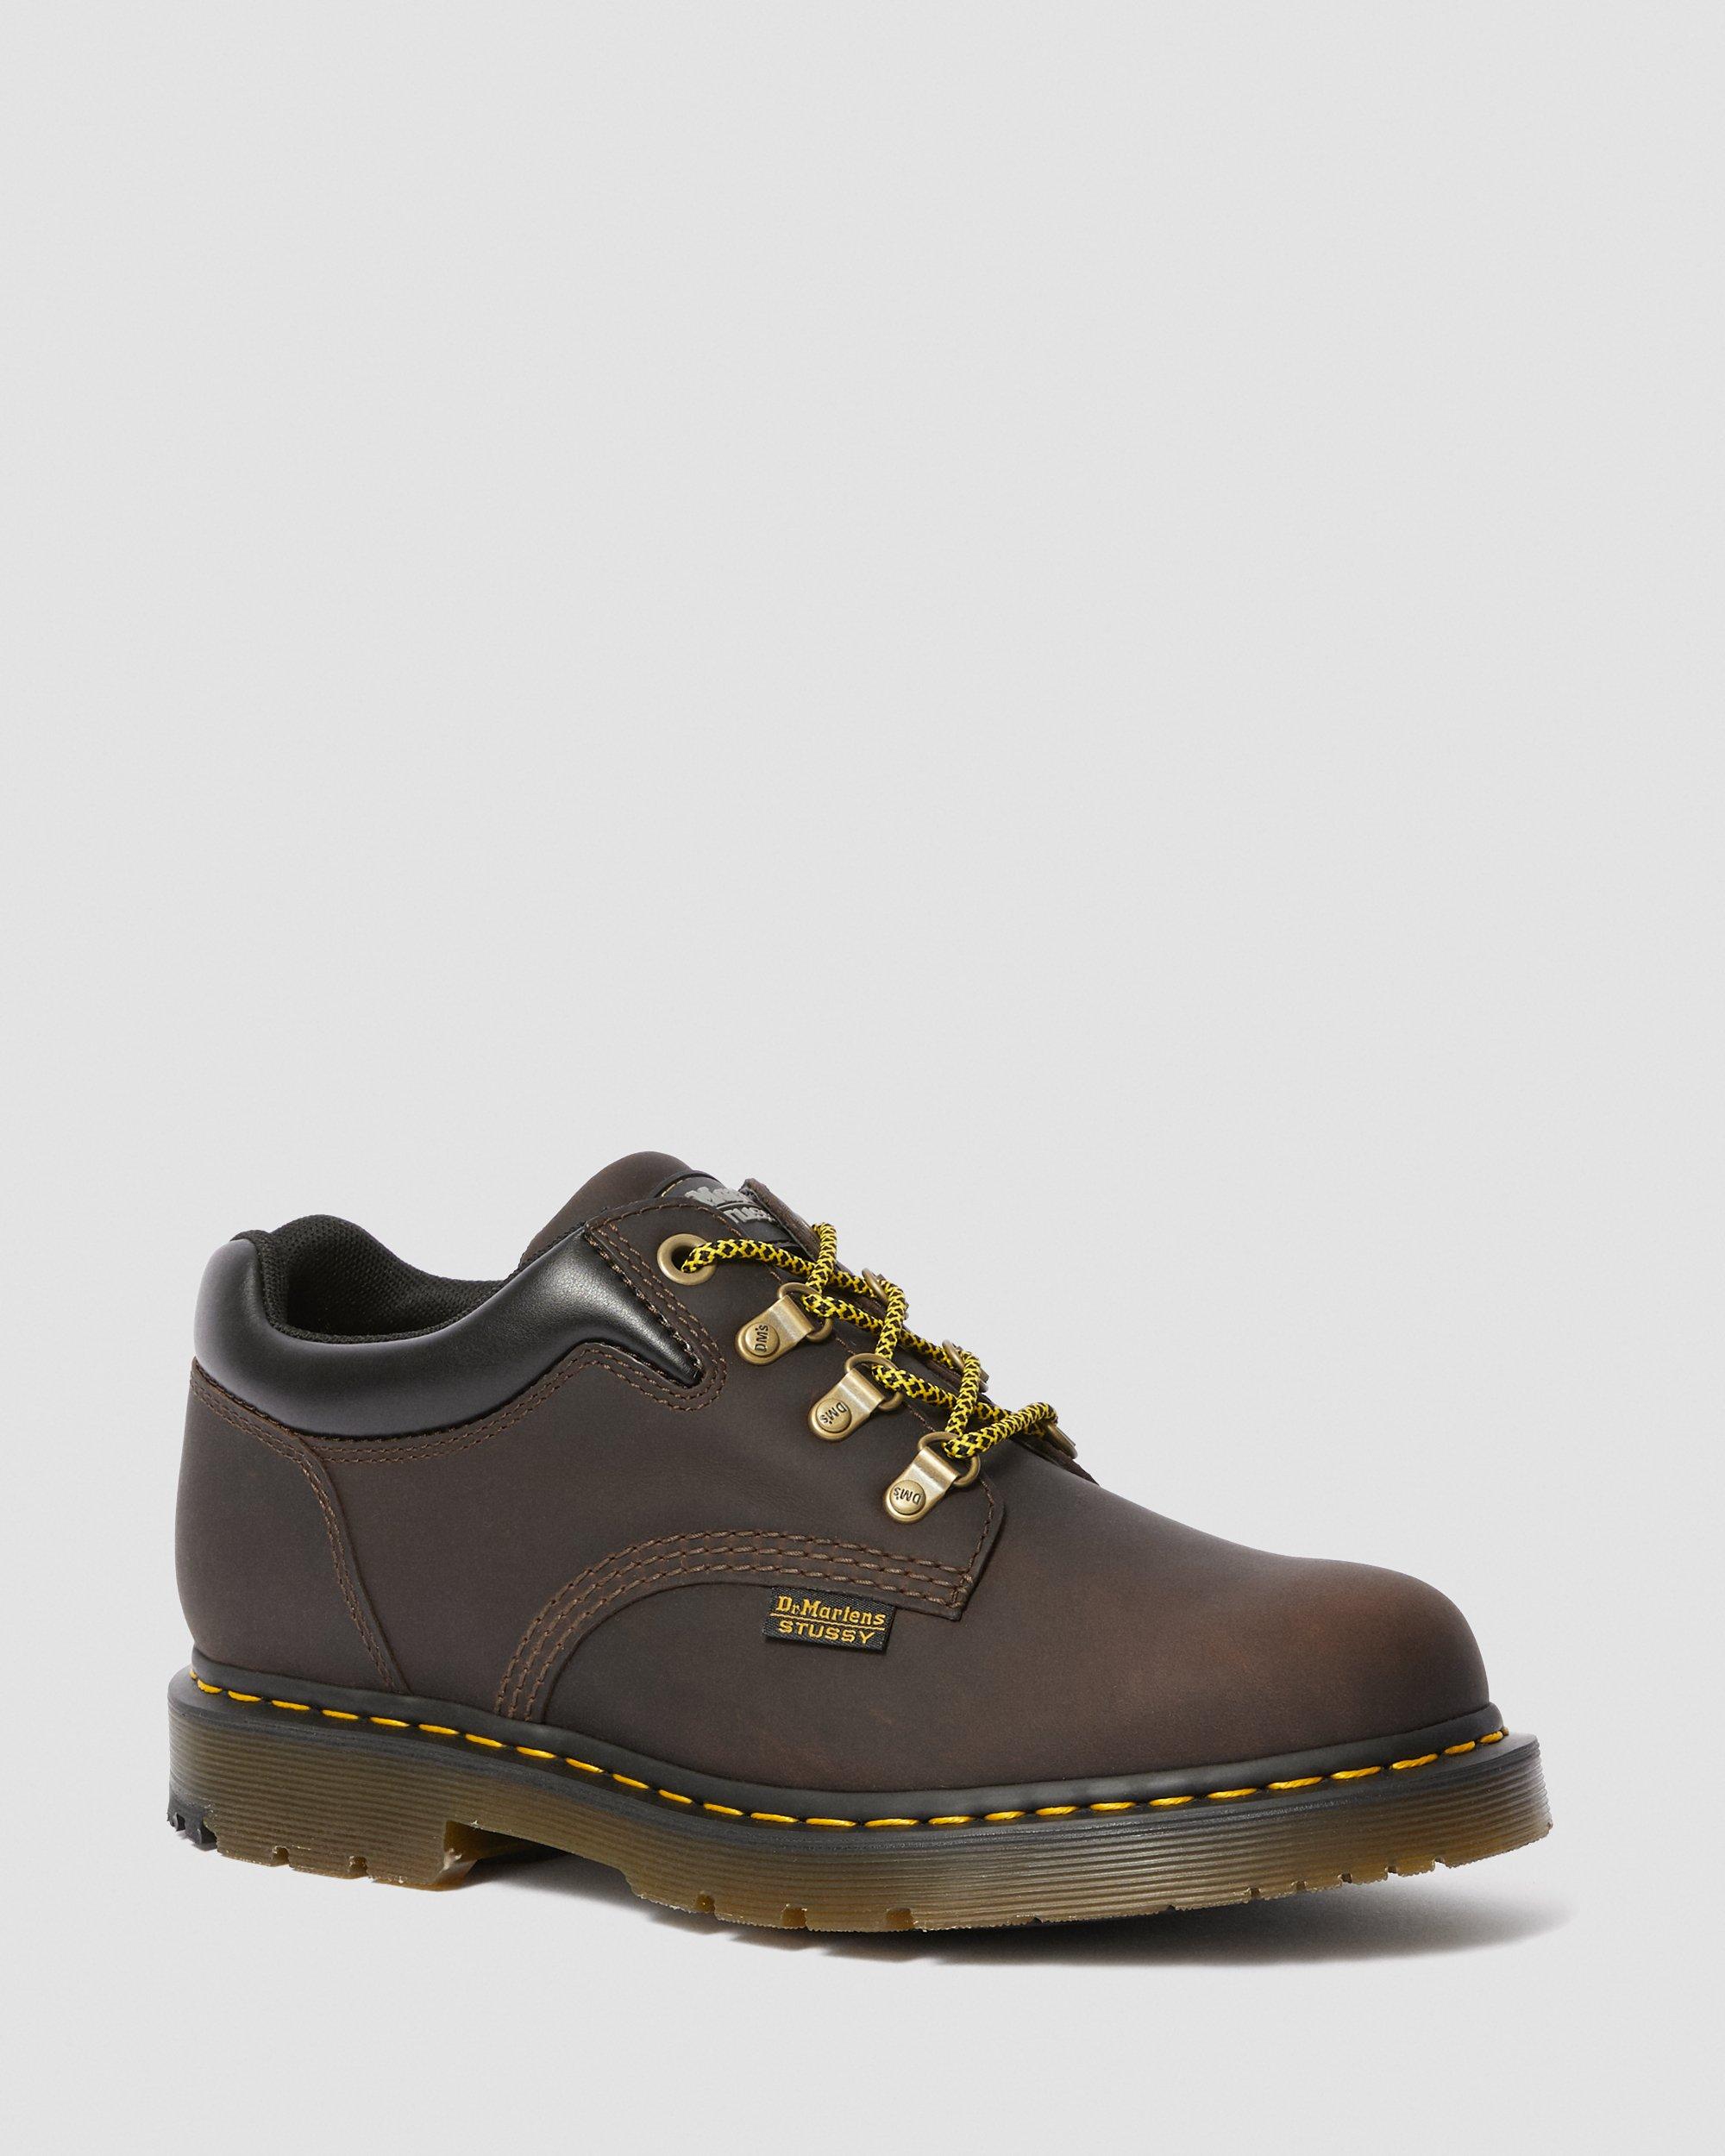 Stϋssy 8053 Hy DM's Wintergrip Shoes, Brown | Dr. Martens